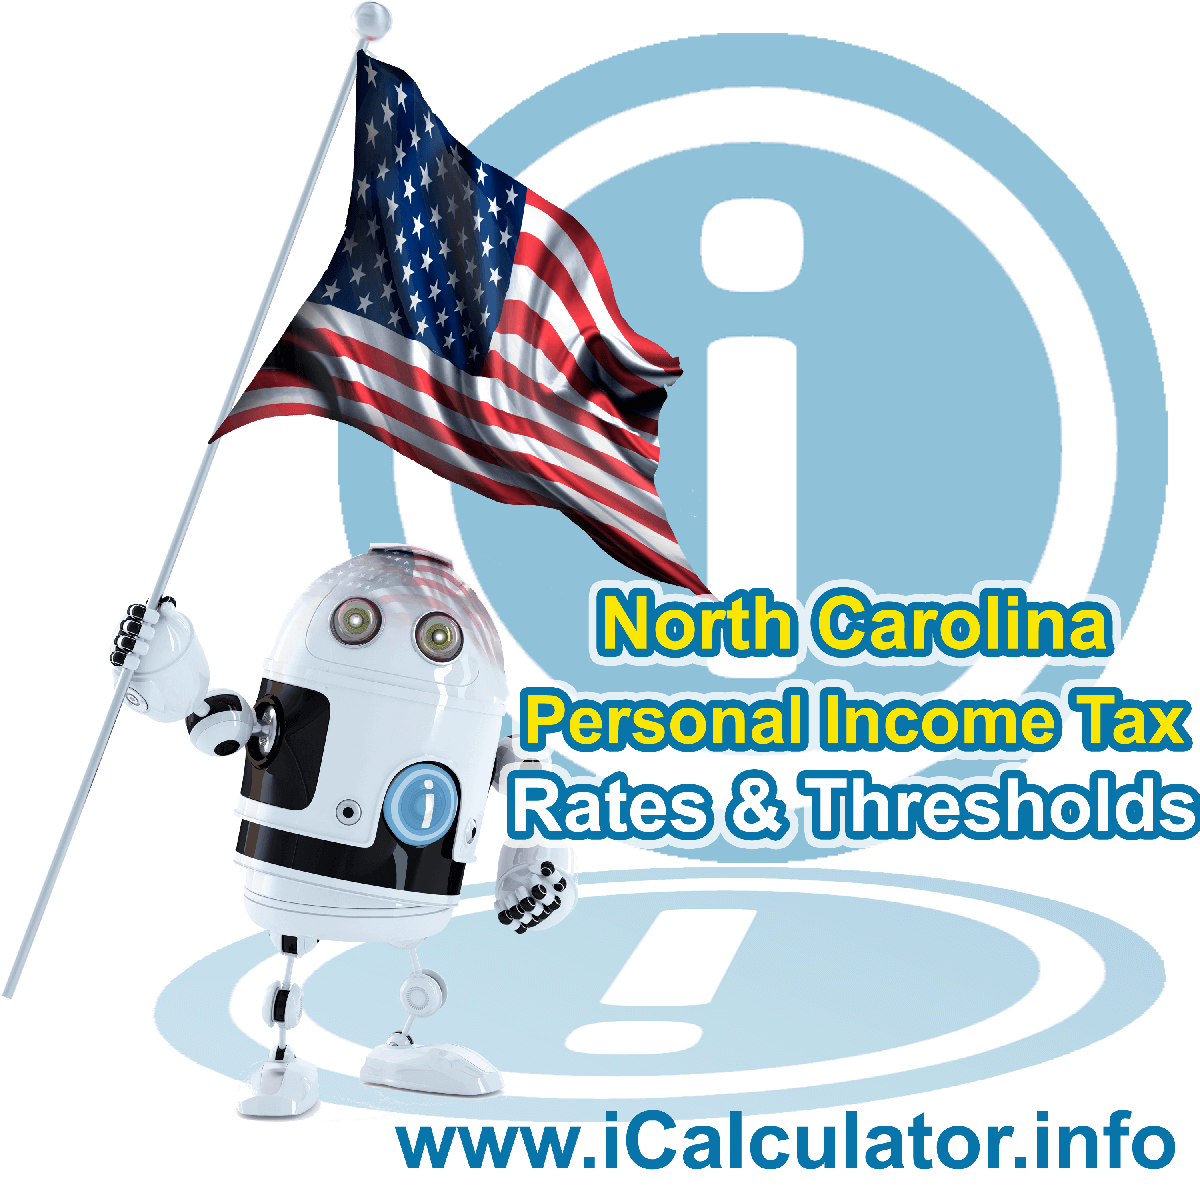 North Carolina State Tax Tables 2020. This image displays details of the North Carolina State Tax Tables for the 2020 tax return year which is provided in support of the 2020 US Tax Calculator